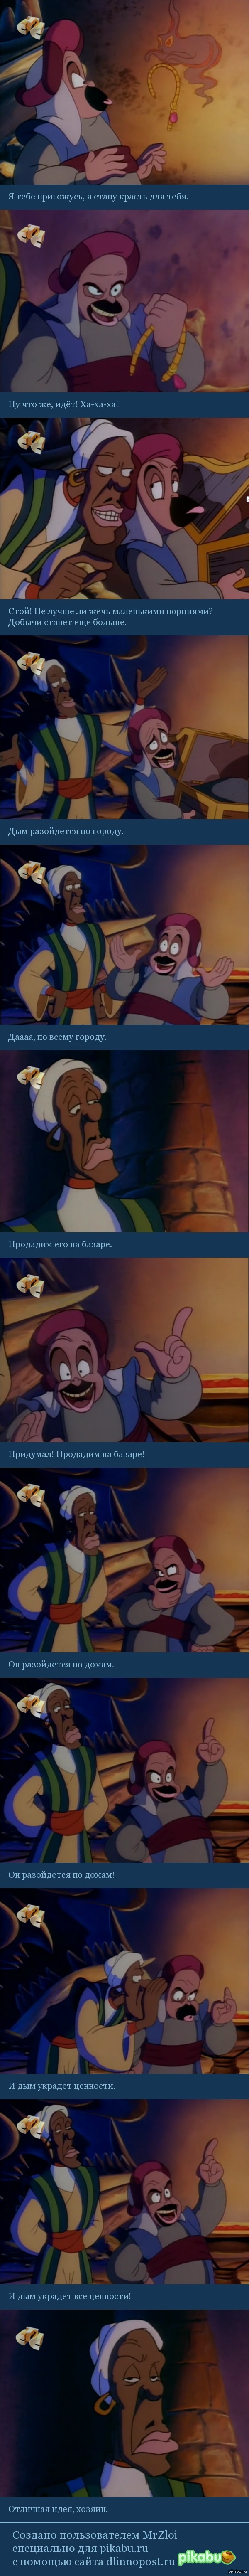 Chief and subordinate. - Aladdin, Picture with text, Longpost, Humor, Images